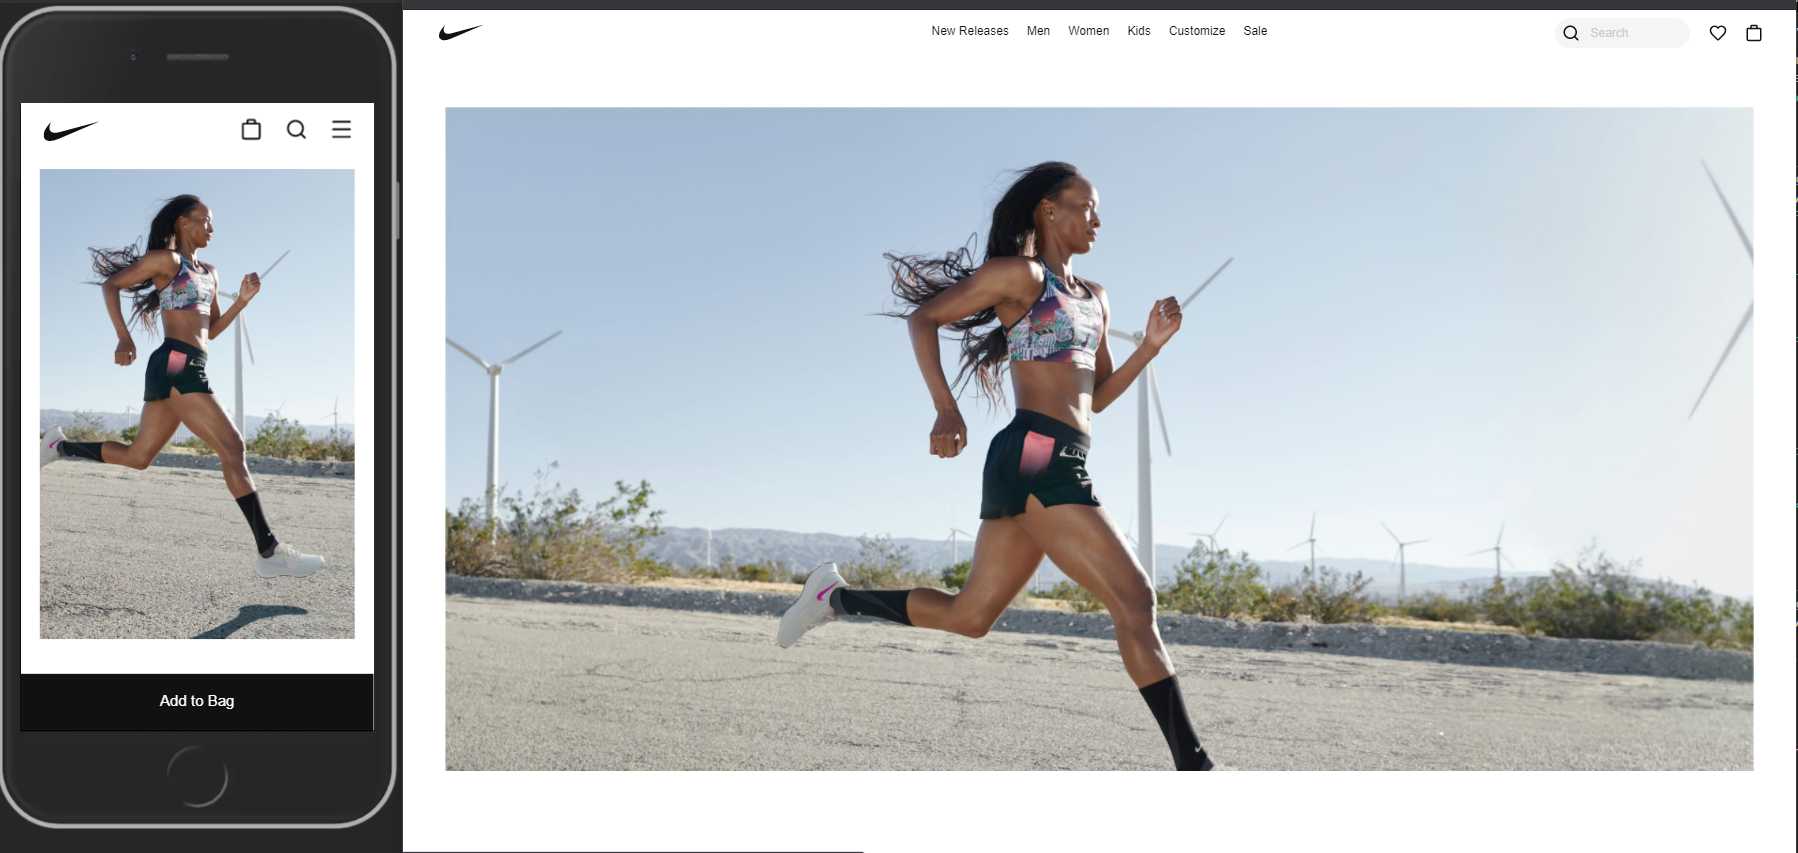 Nike.com uses responsive design and changes the image orientation and size between various devices.